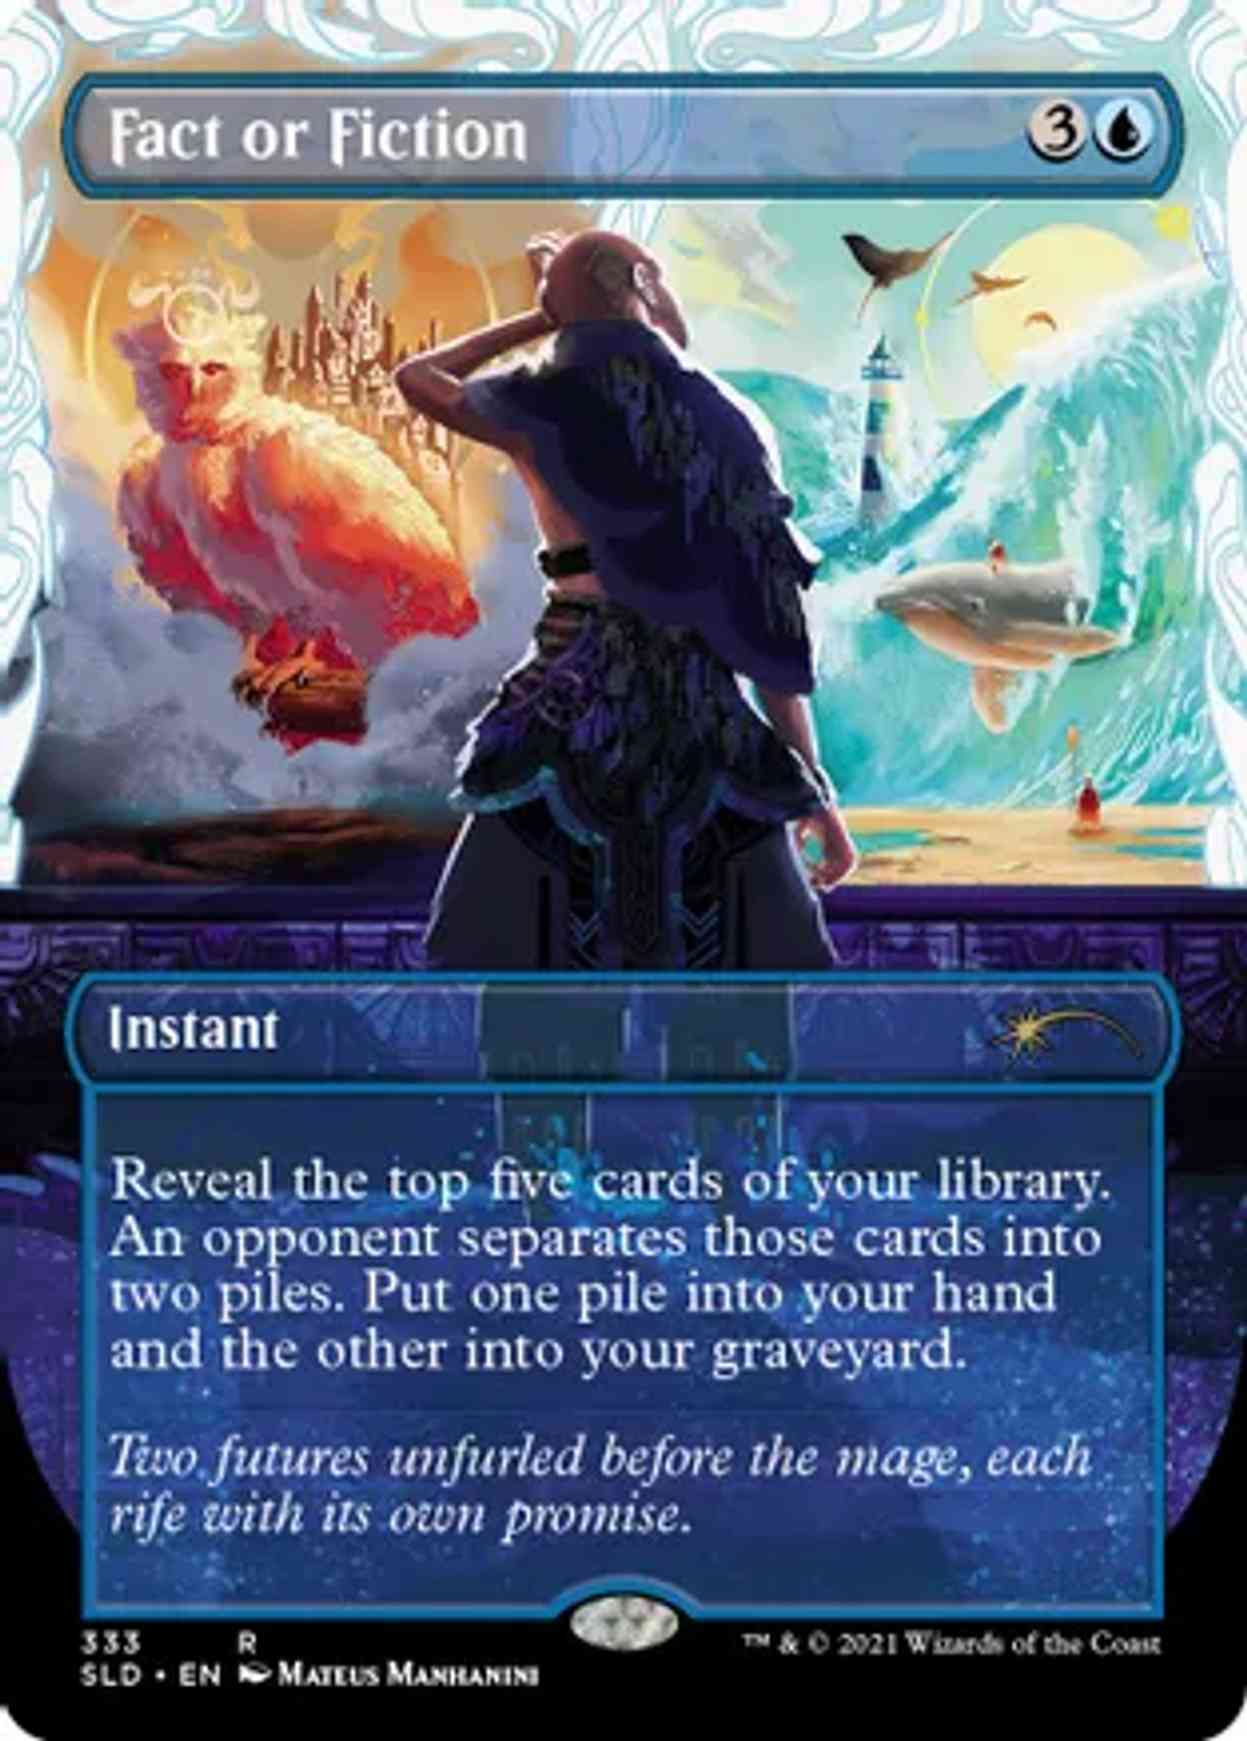 Fact or Fiction magic card front